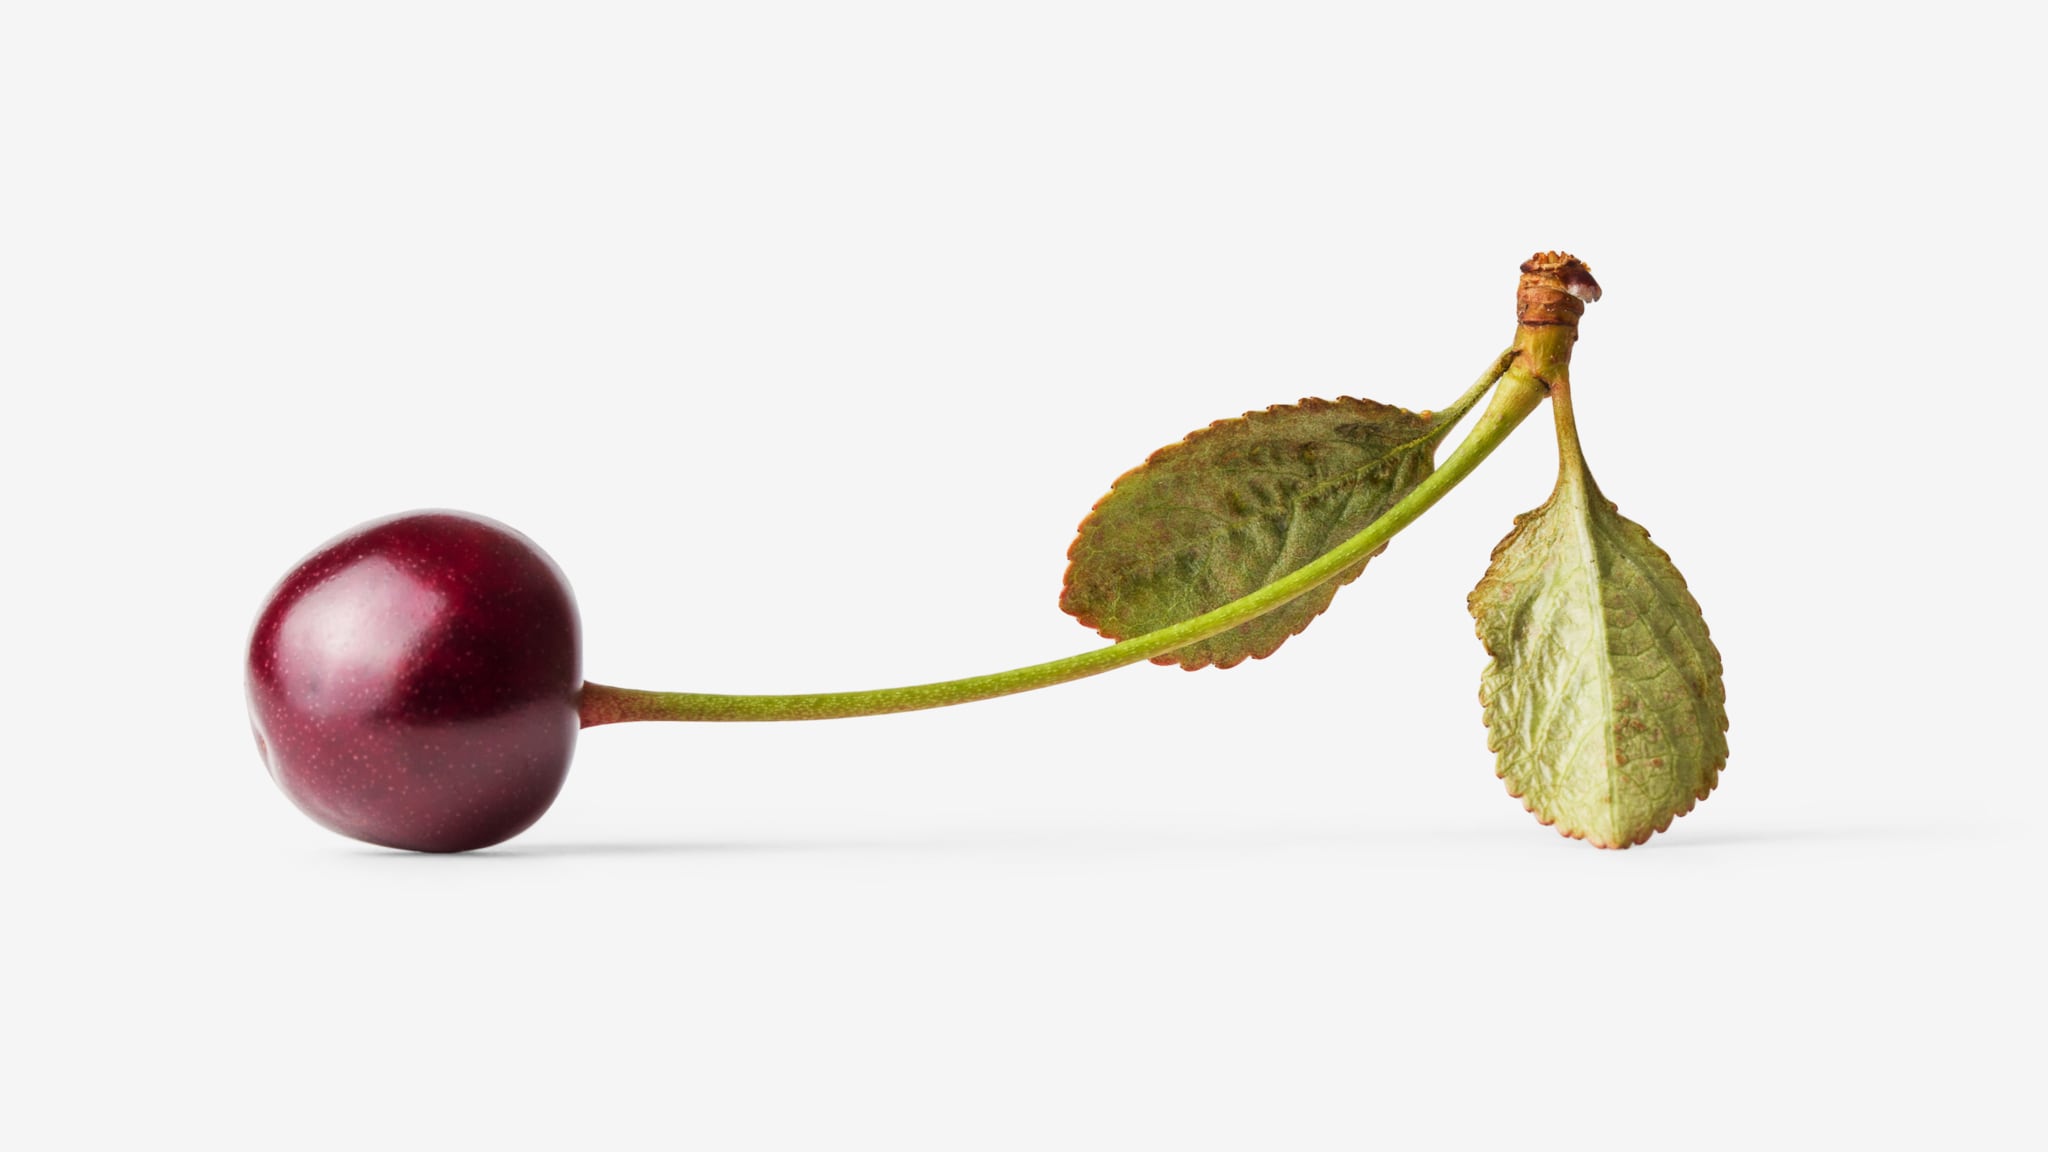 Cherry image with transparent background